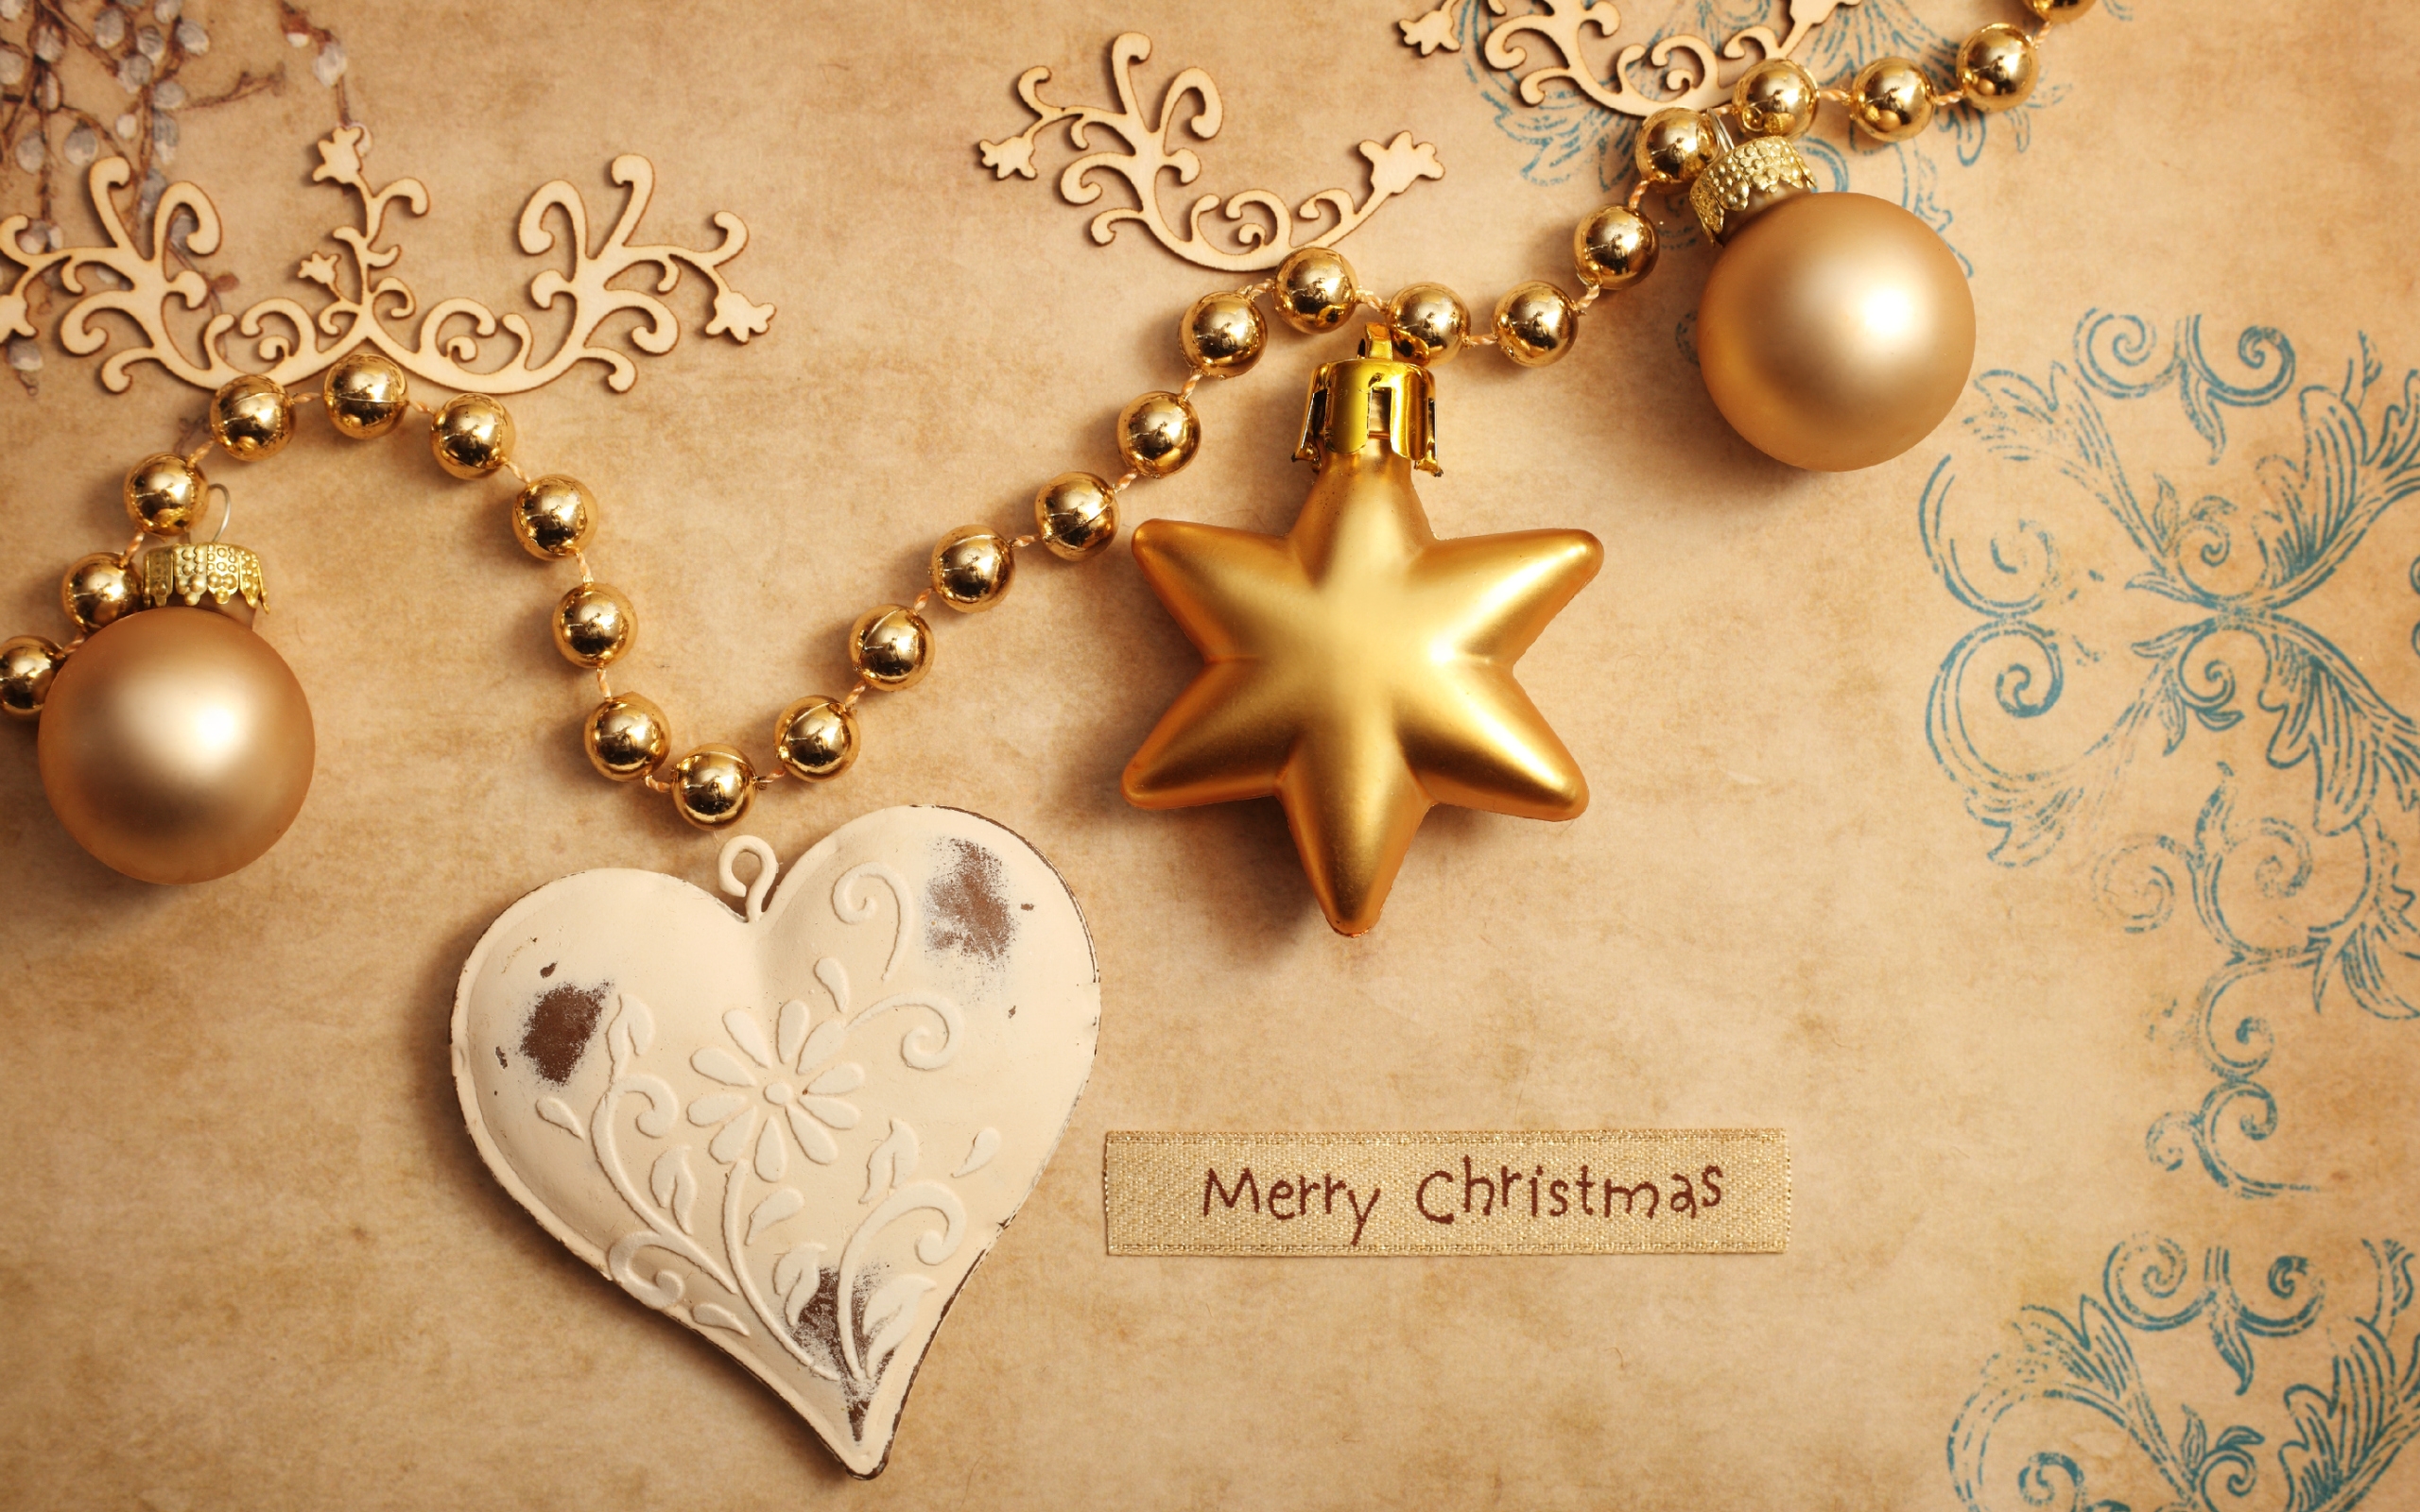 Merry Christmas Card for 2560 x 1600 widescreen resolution